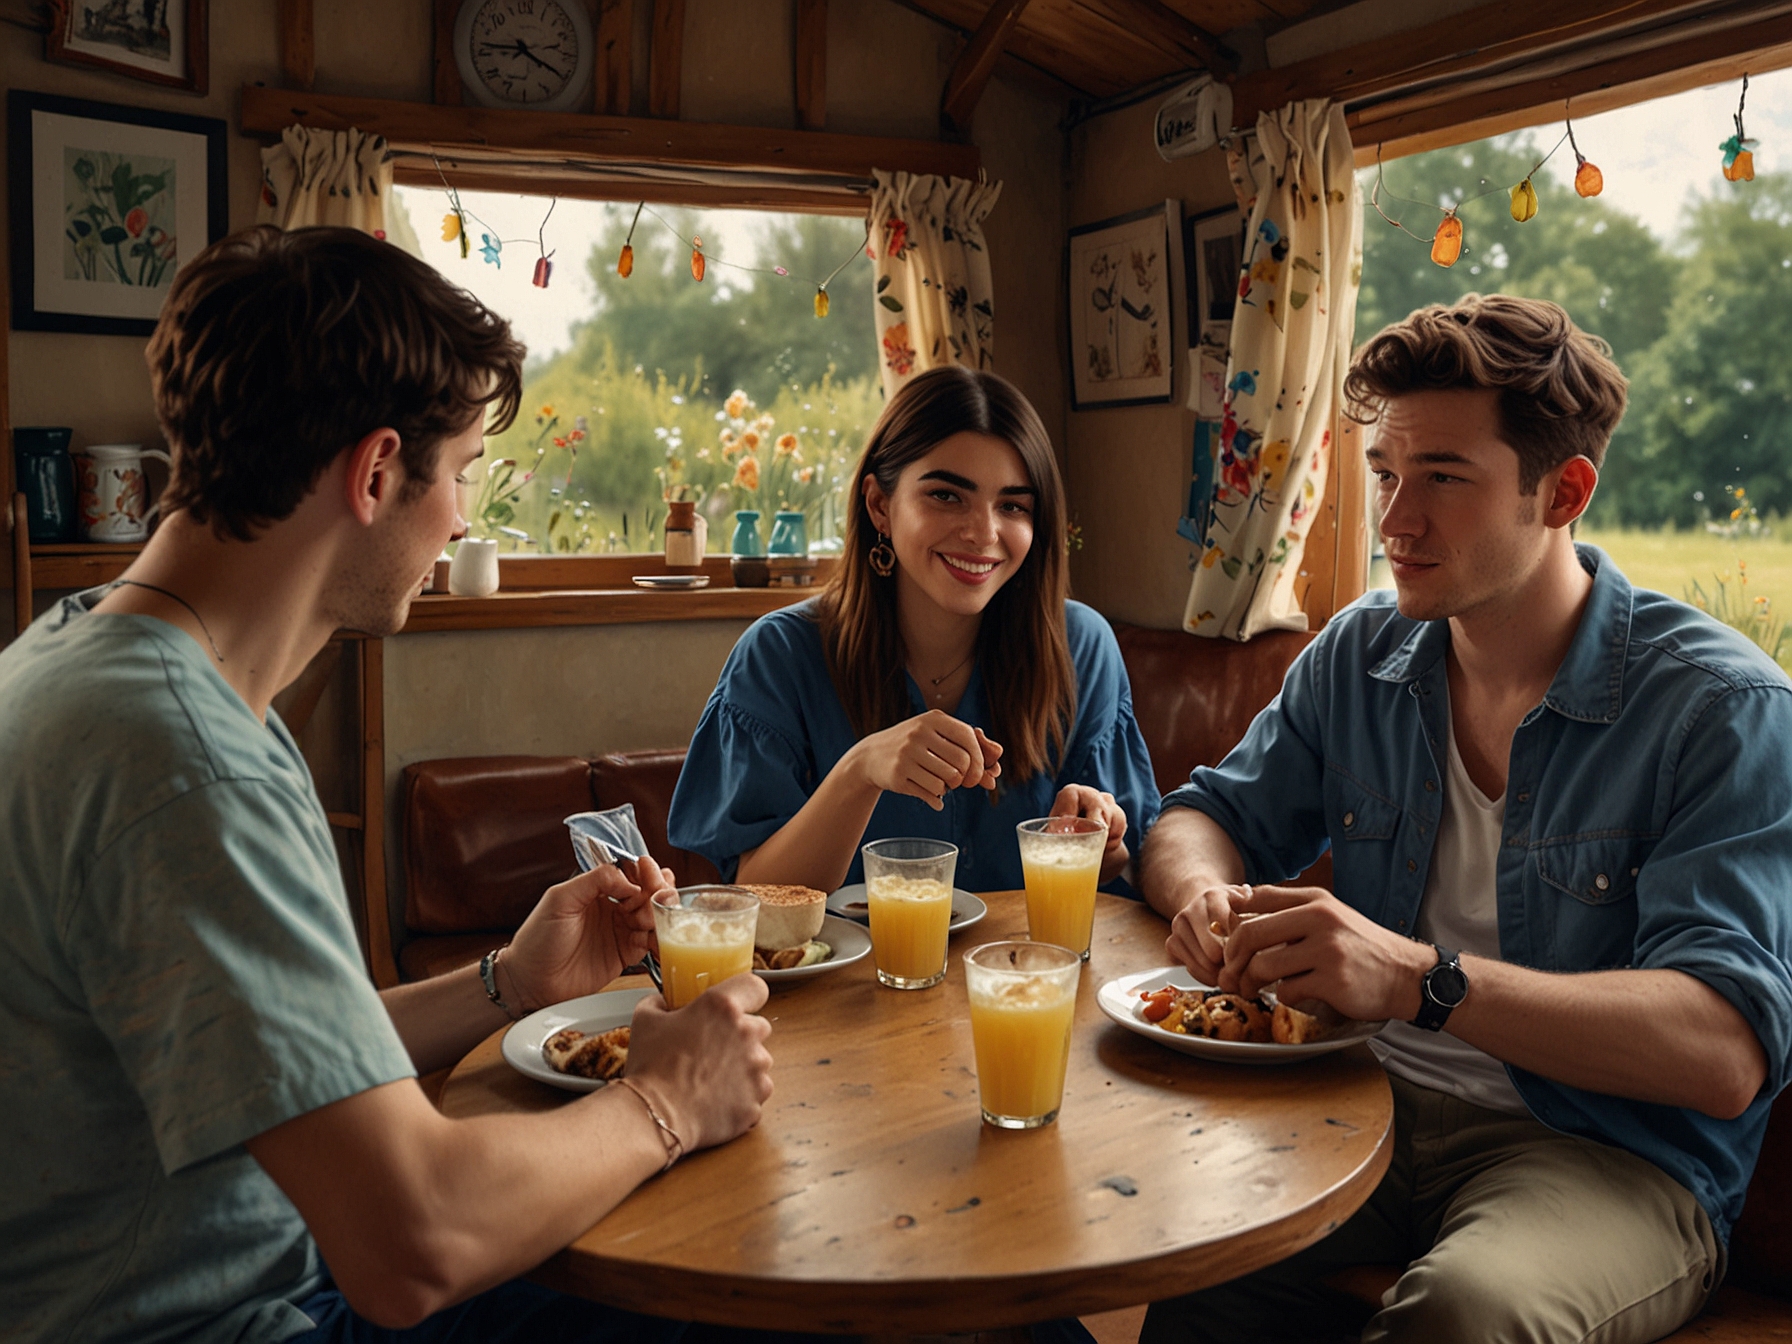 Dua Lipa and Callum Turner share a laid-back lunch with her family, depicting a moment of tranquility and connection before the excitement of her Glastonbury performance.